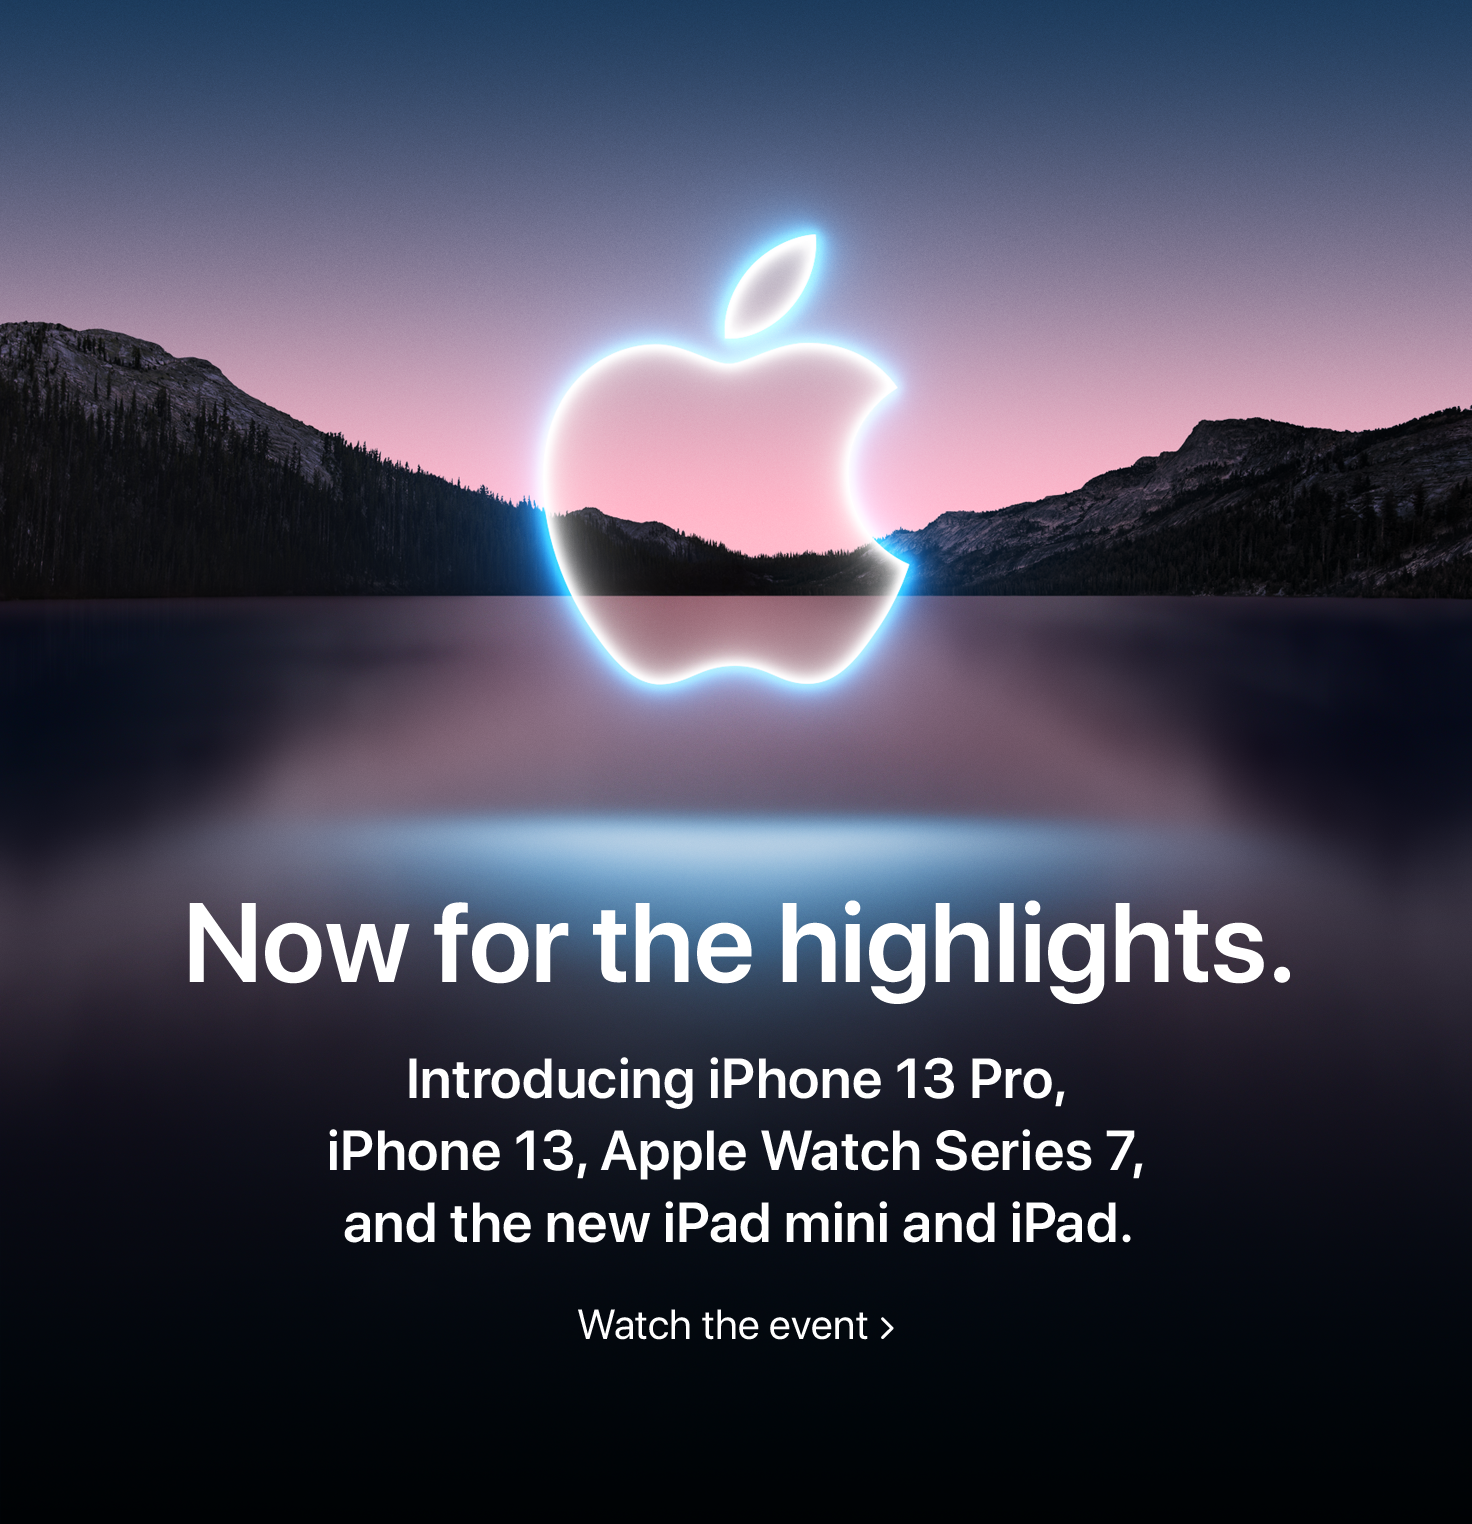 Now for the highlights. Introducing iPhone 13 Pro, iPhone 13, Apple Watch Series 7, and the new iPad mini and iPad. Watch the event